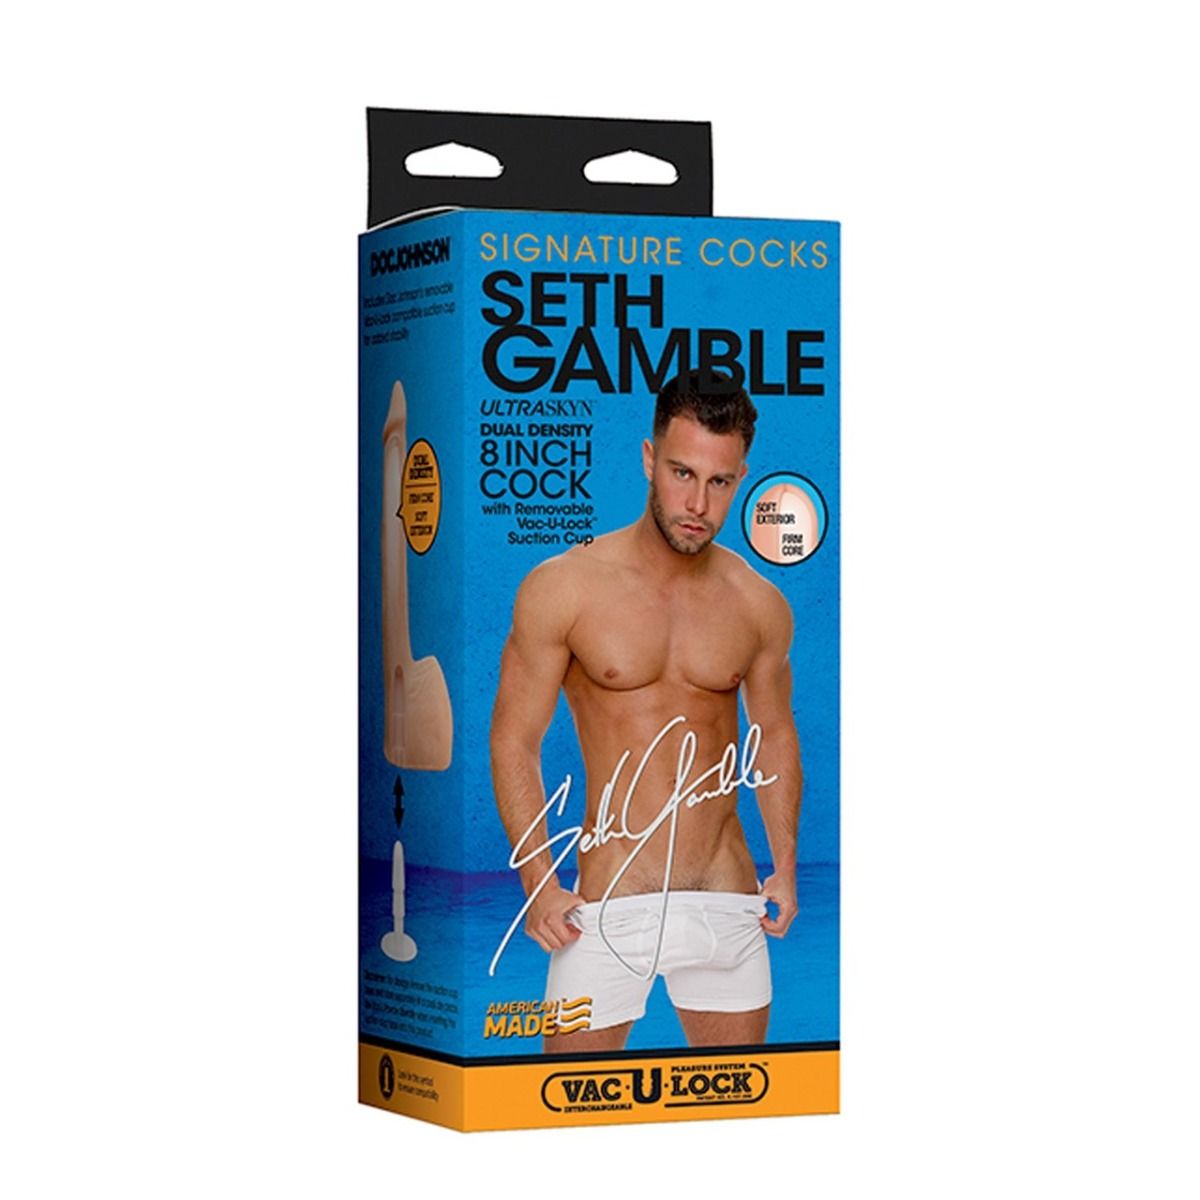 Dildos Signature Cocks - Seth Gamble 8 Inch ULTRASKYN Cock with Removable Vac-U-Lock Suction Cup   